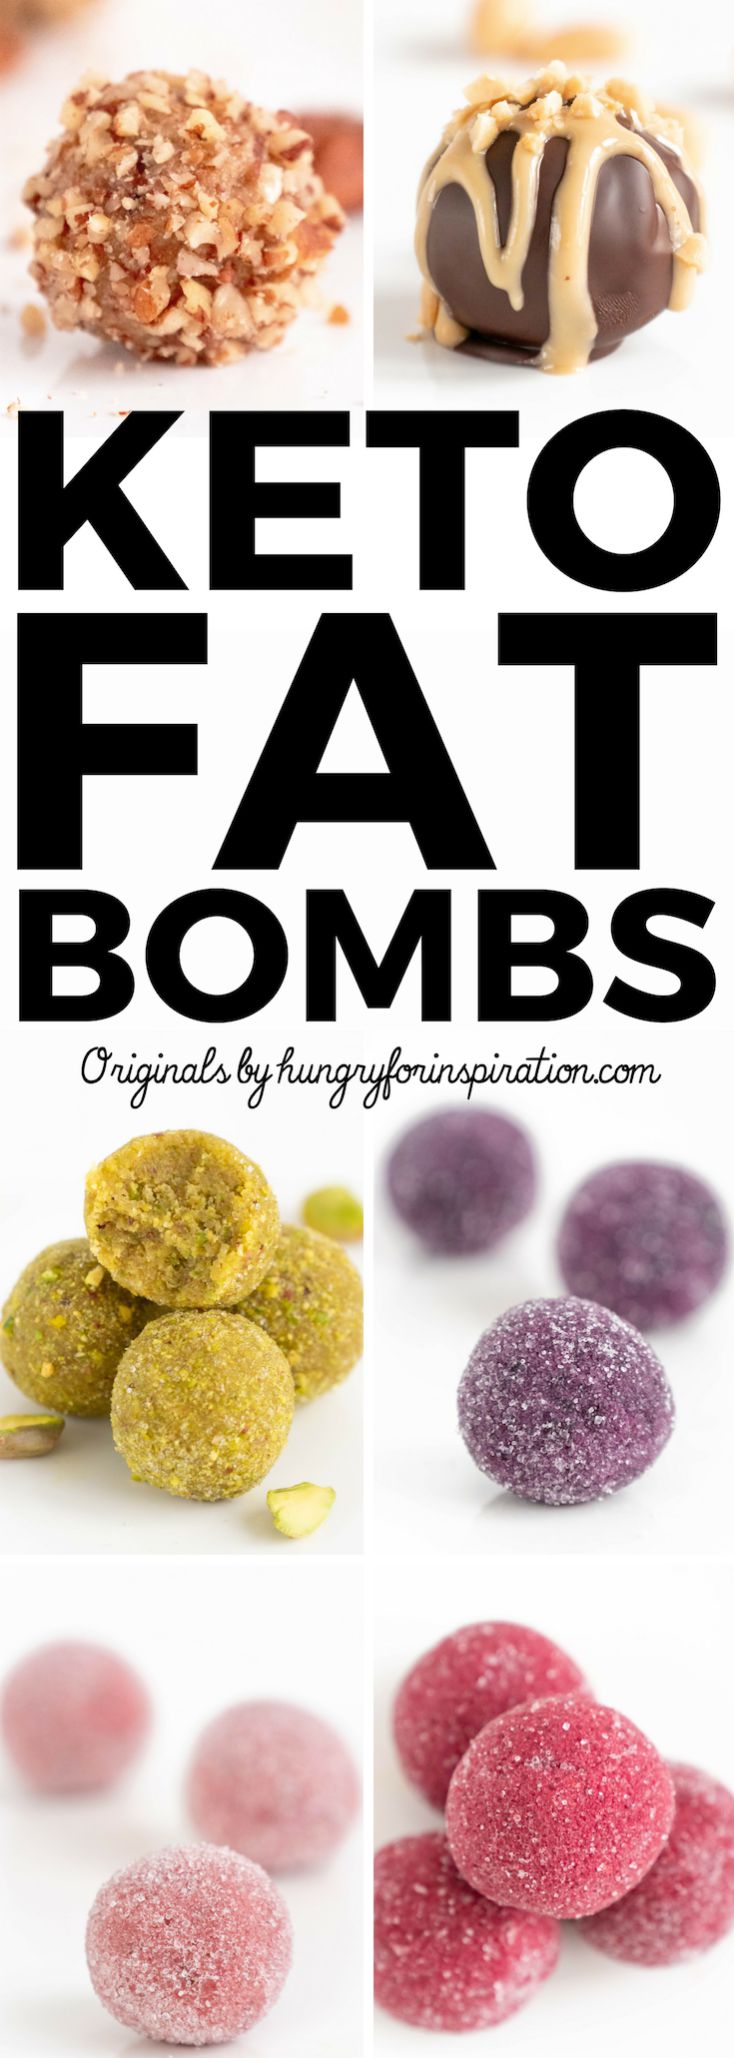 Keto Fat Bombs by Hungry for Inspiration (hungryforinspiration.com) - ketogenic fat bomb collection